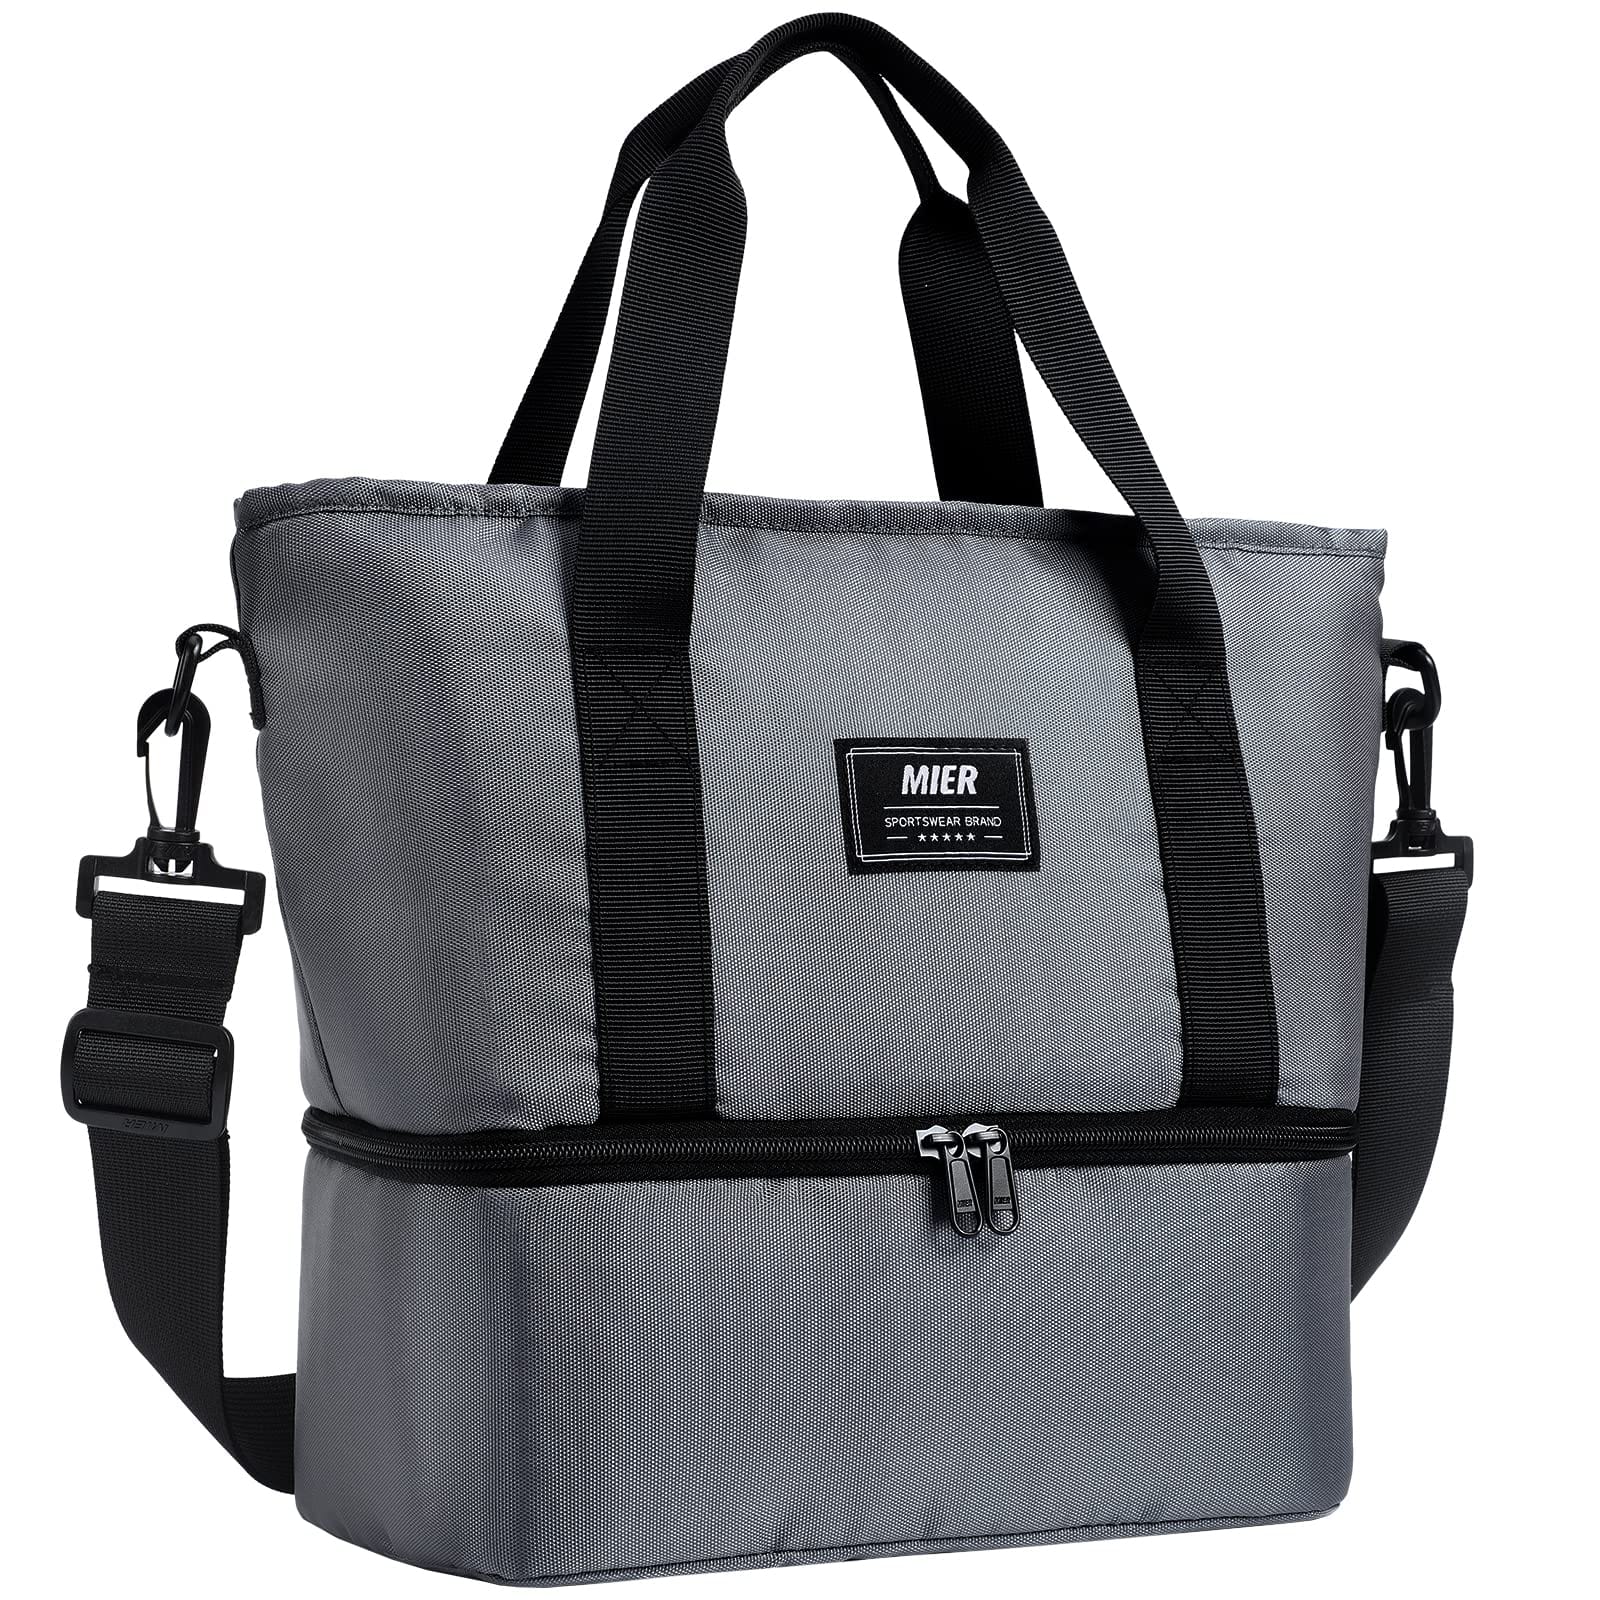 Dual Compartment Lunch Bag for Women Insulated Lunch Box Totes Fashionable Lunch Bag Grey MIER